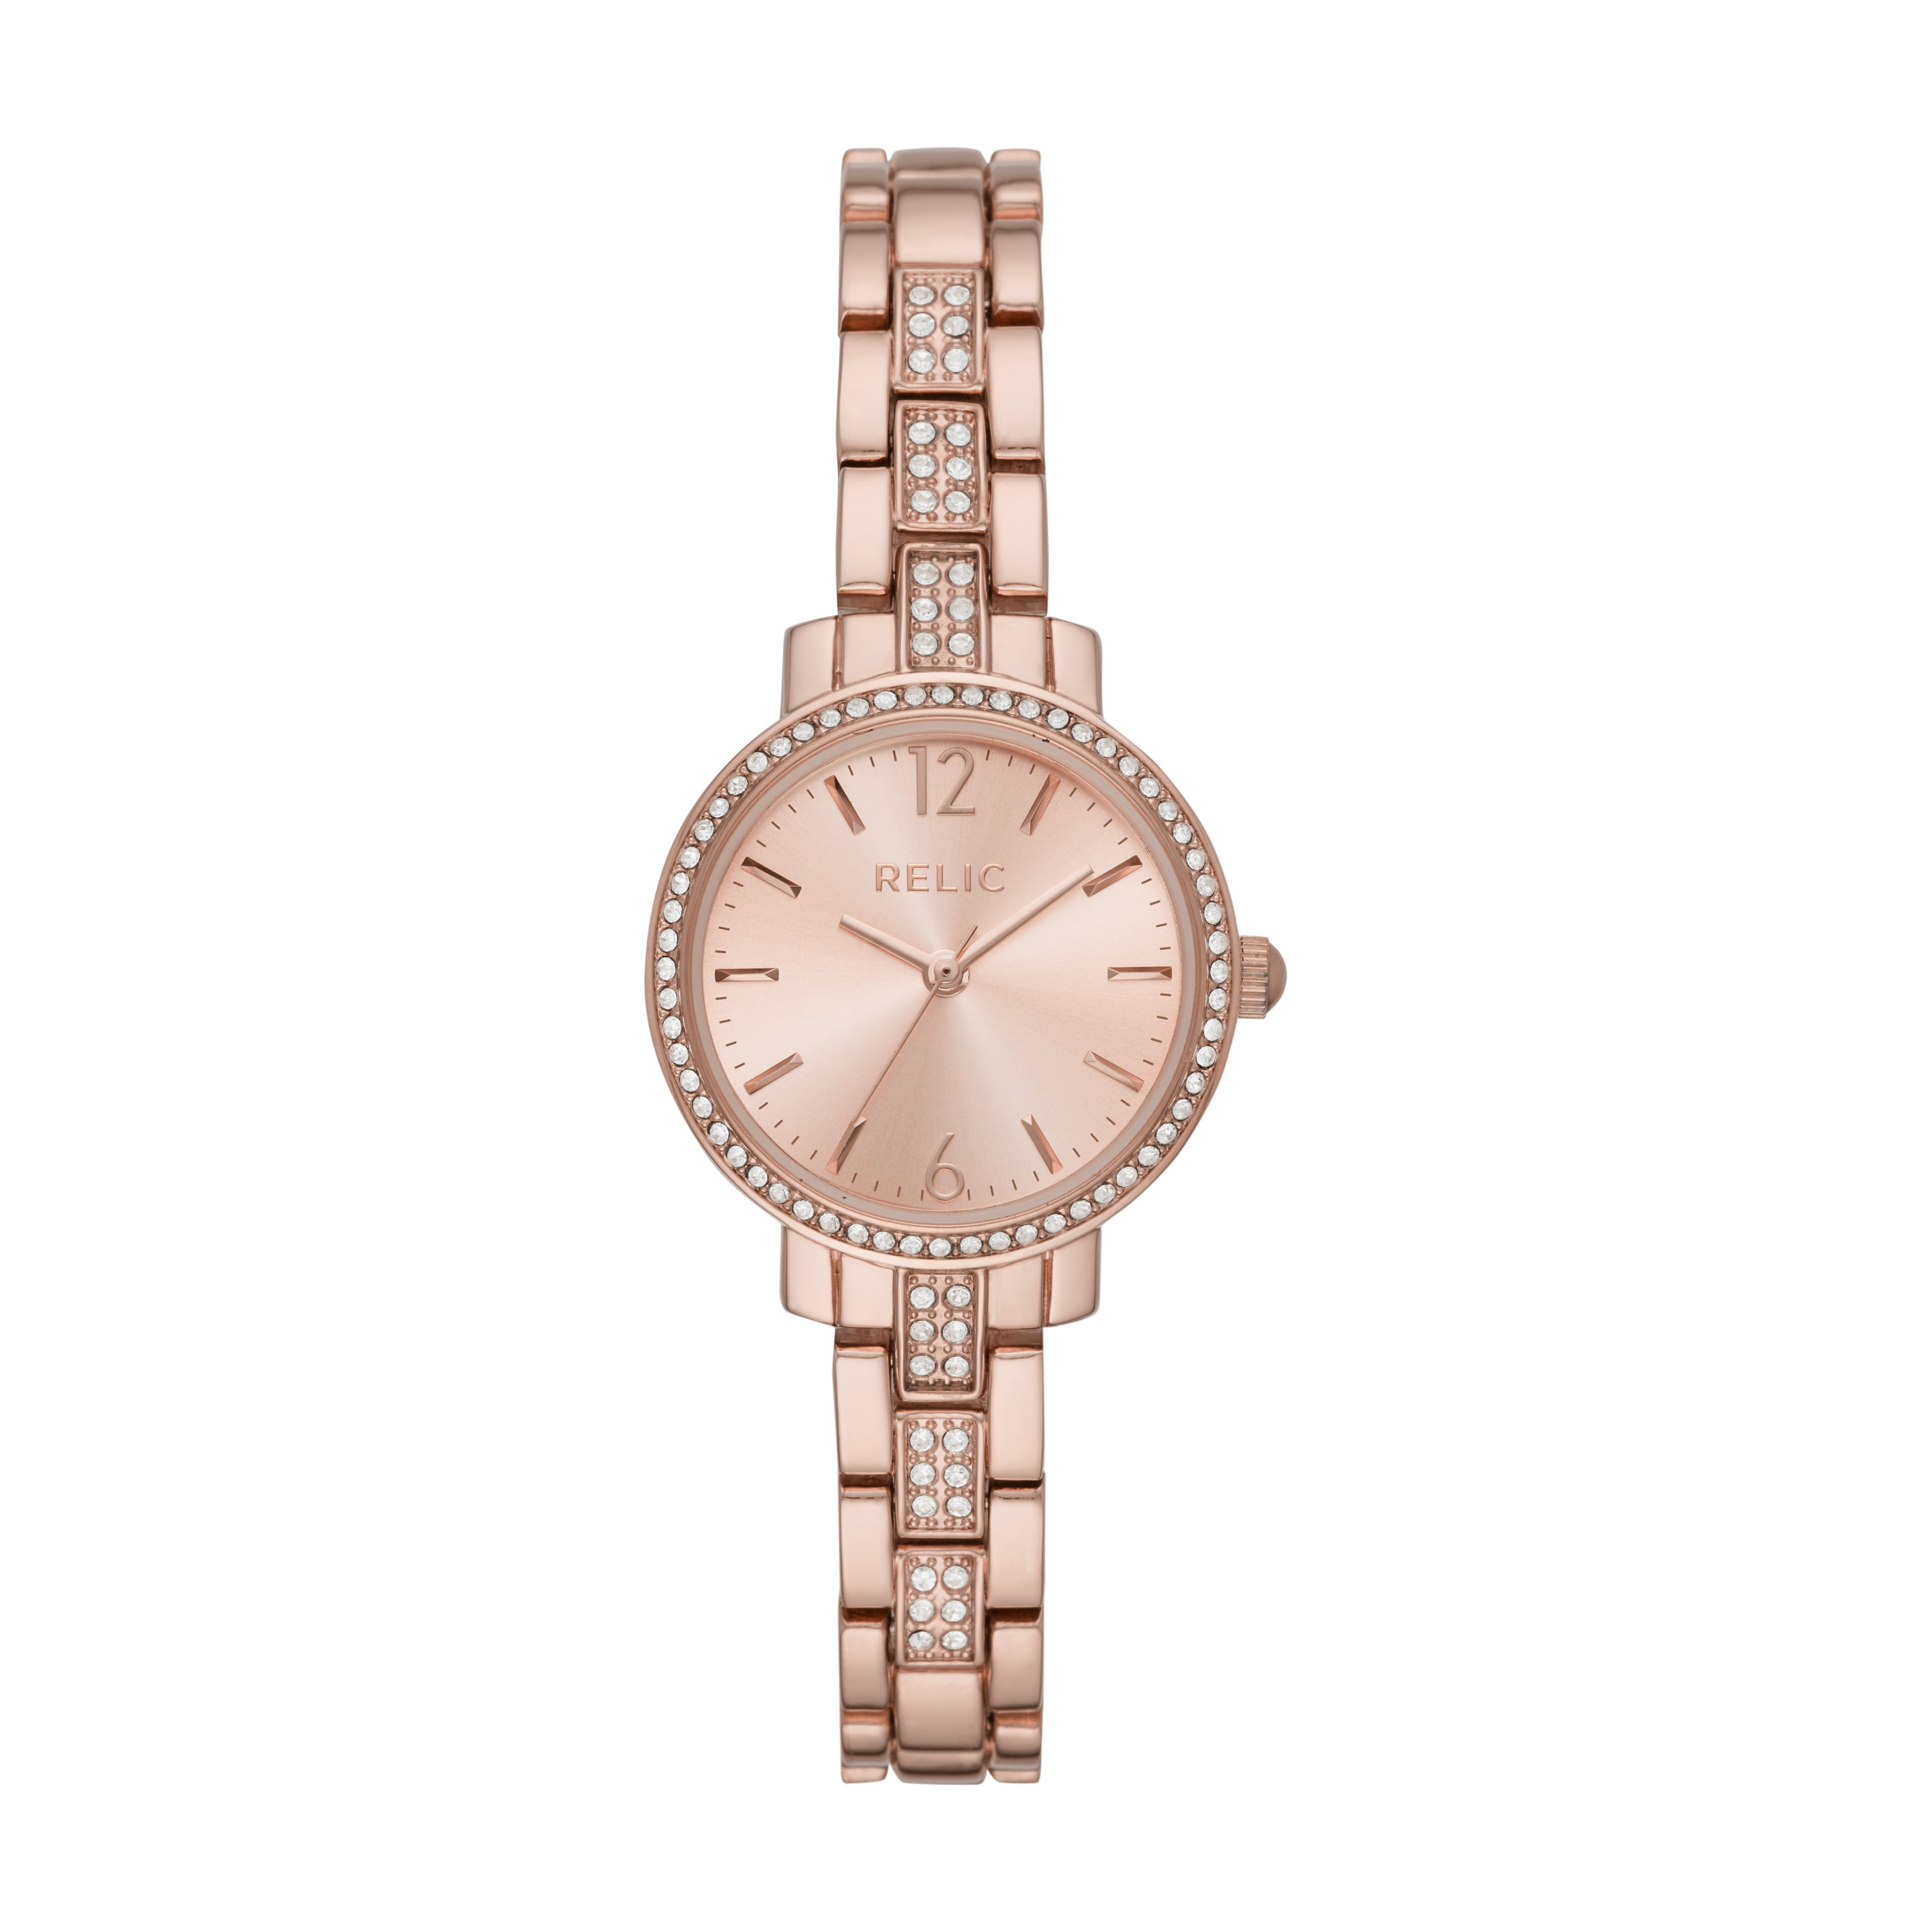 Relic by Fossil Women's Reagan Rose Gold-Tone Alloy Watch - Walmart.com